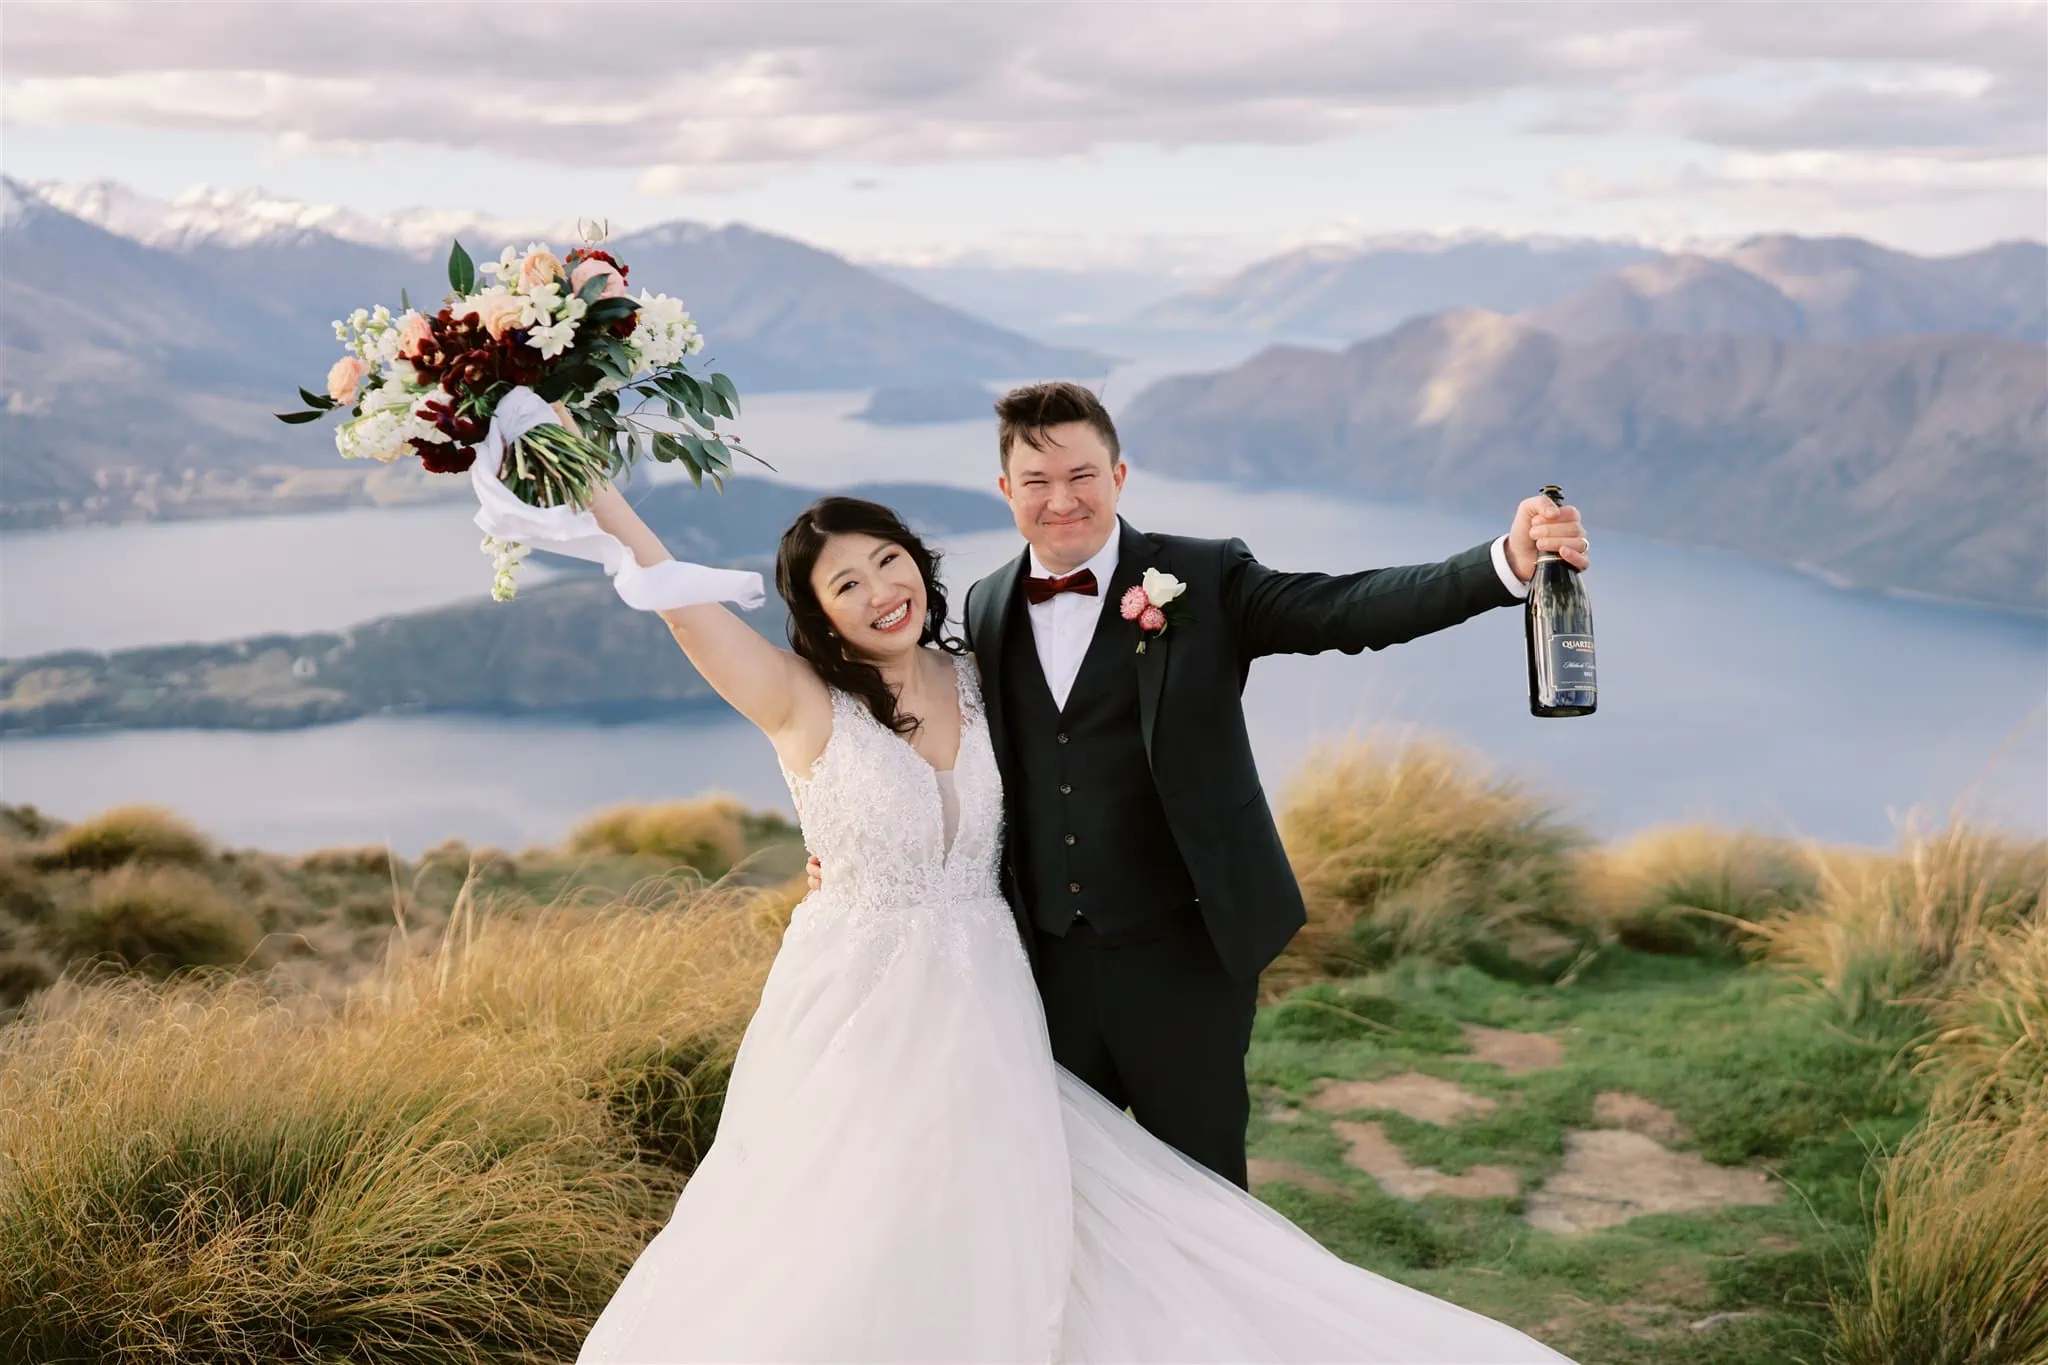 Queenstown Elopement Heli Wedding Photographer クイーンズタウン結婚式 | An elopement wedding on top of a mountain in New Zealand, with the bride and groom holding a bottle of champagne to celebrate.